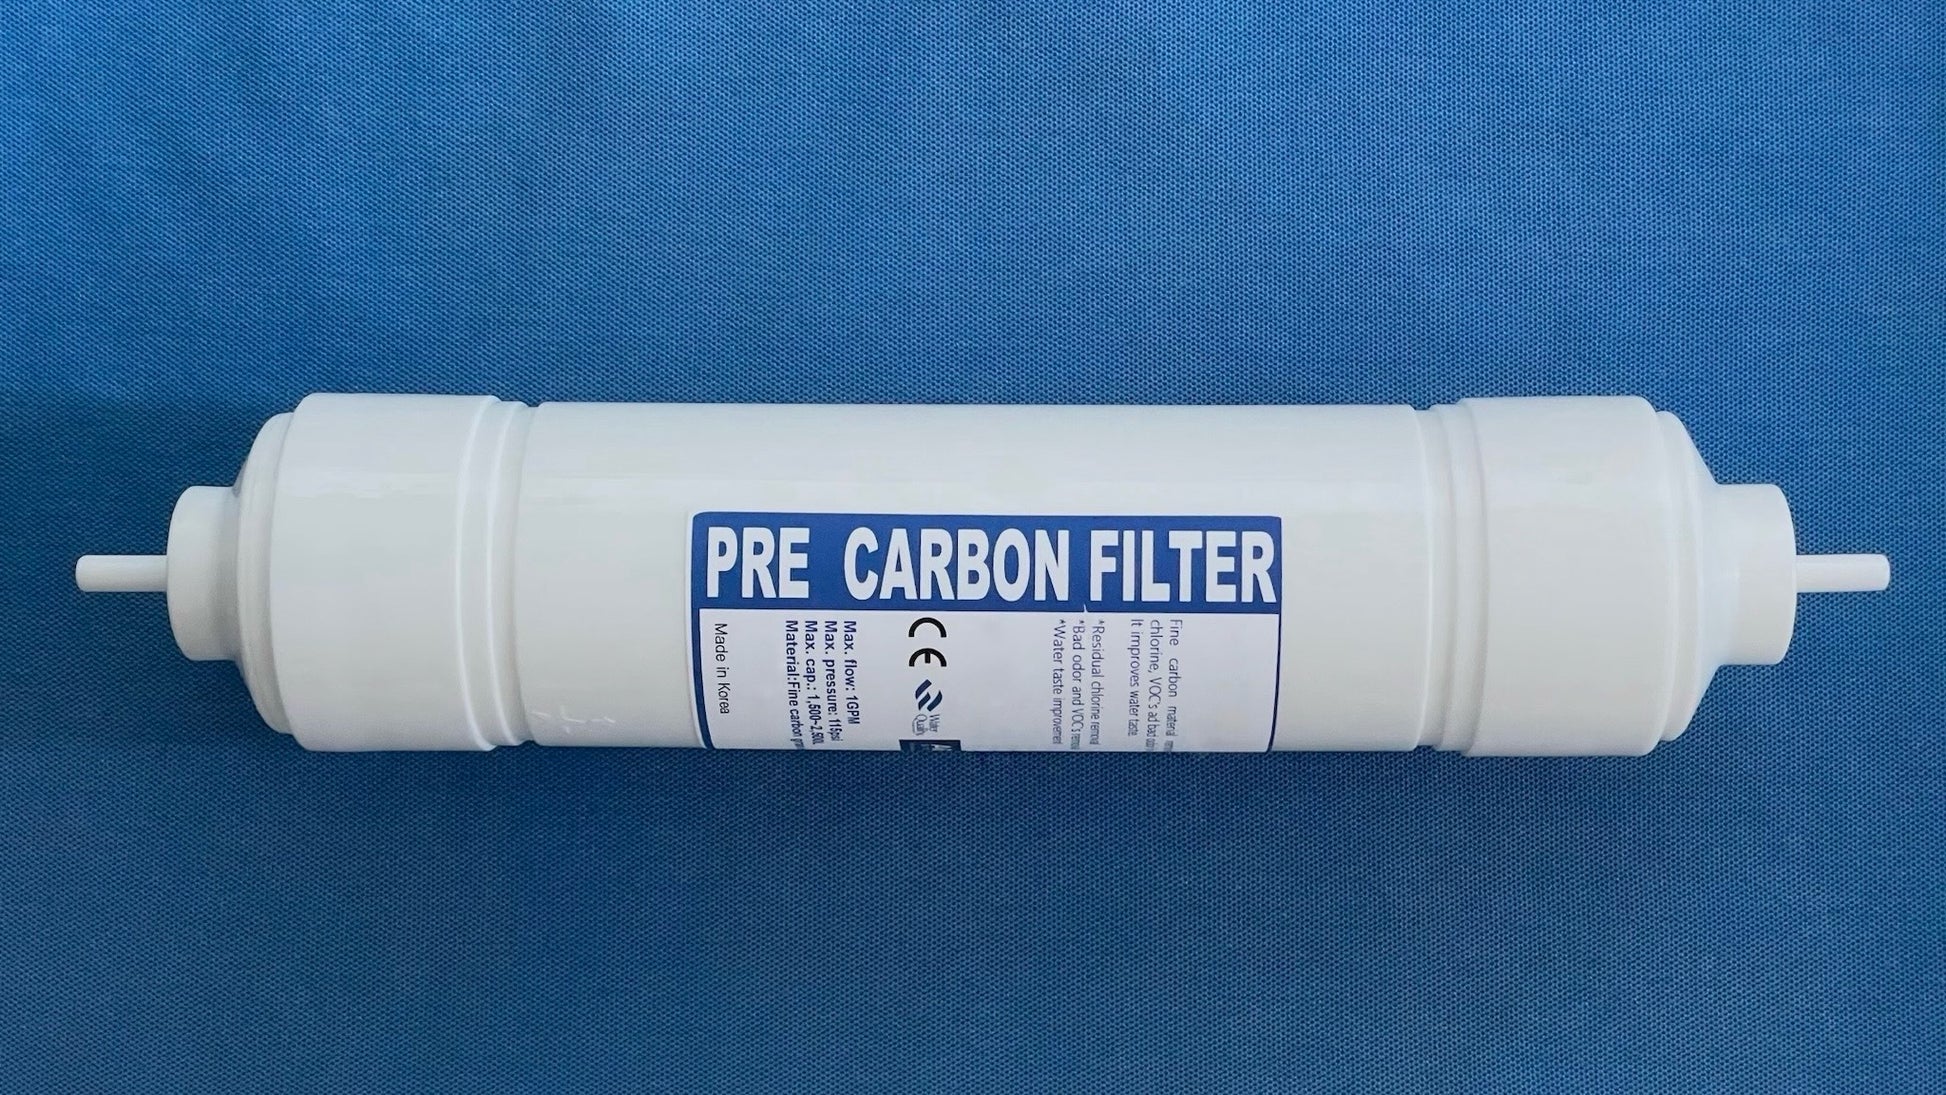 One Pre Carbon Filter